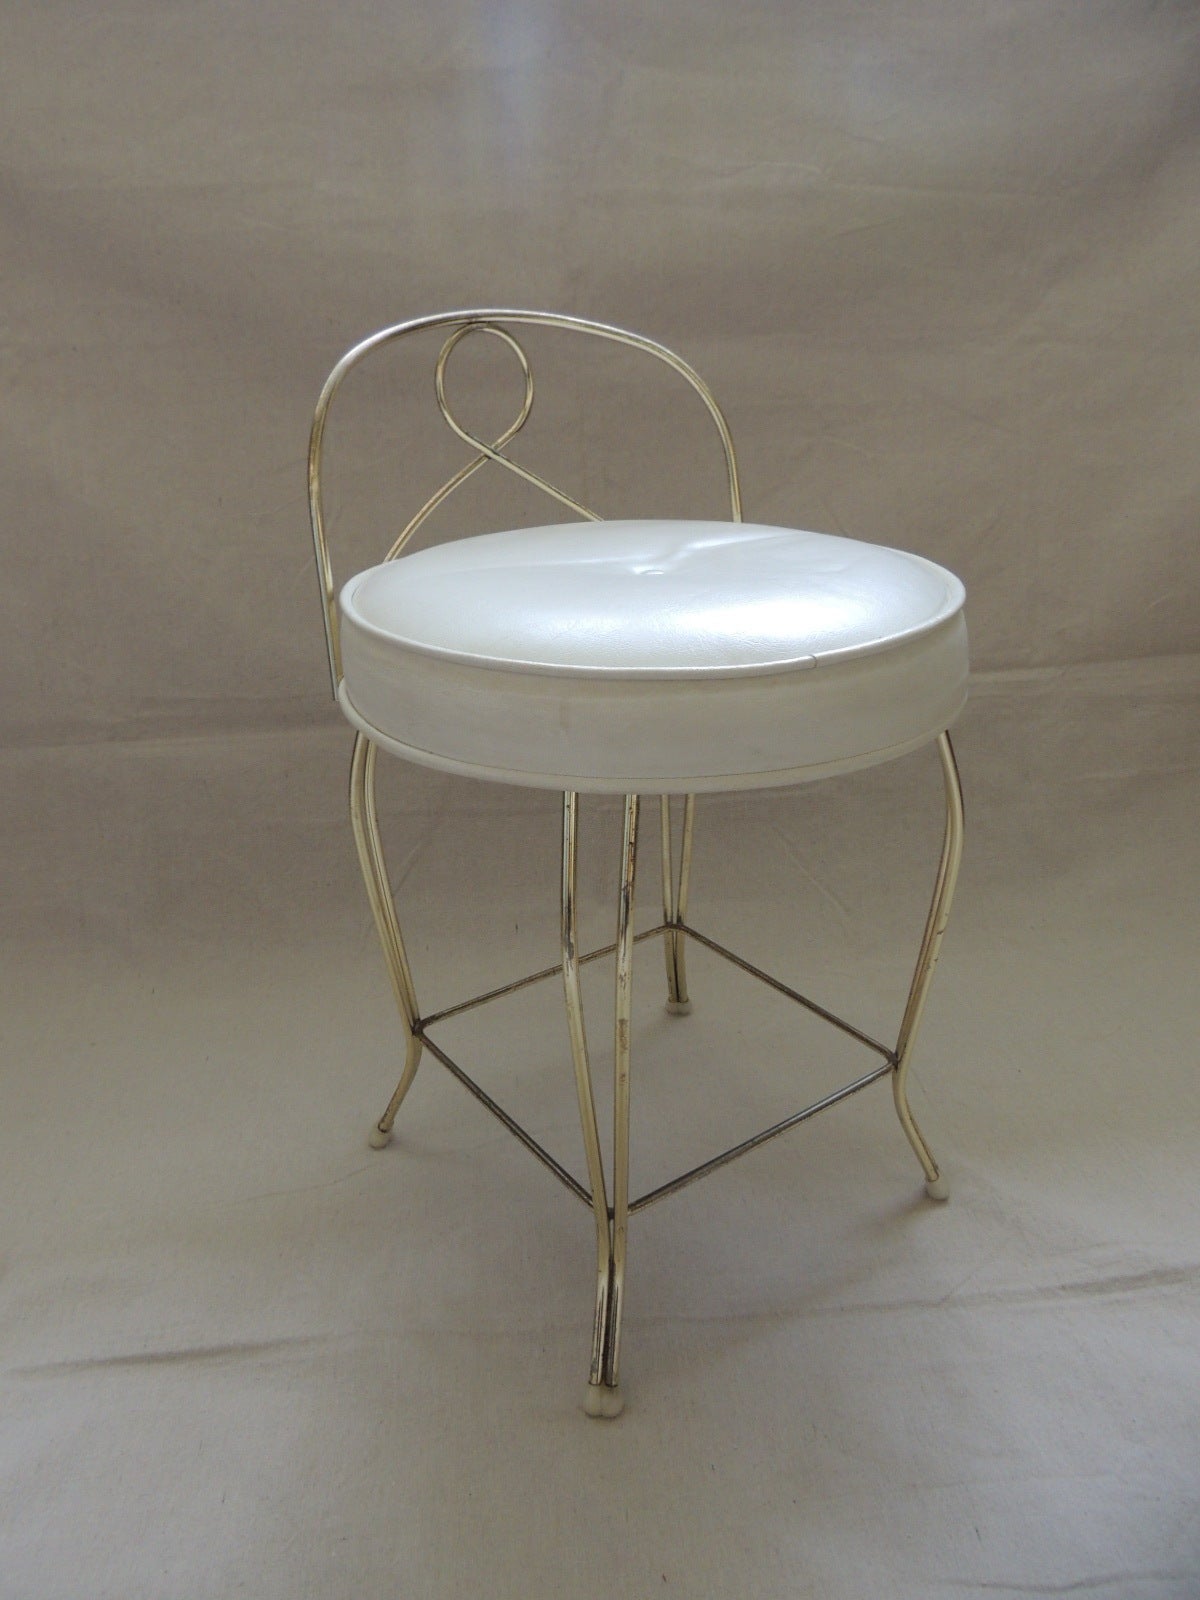 This item is part of our 7Th Anniversary SALE:
Vintage Art Deco style vanity stool with round cushion. 
Original faux leather seat cushion with tufted button in white. 
Brass frame.
Size: 14D x 17SH x 23BH